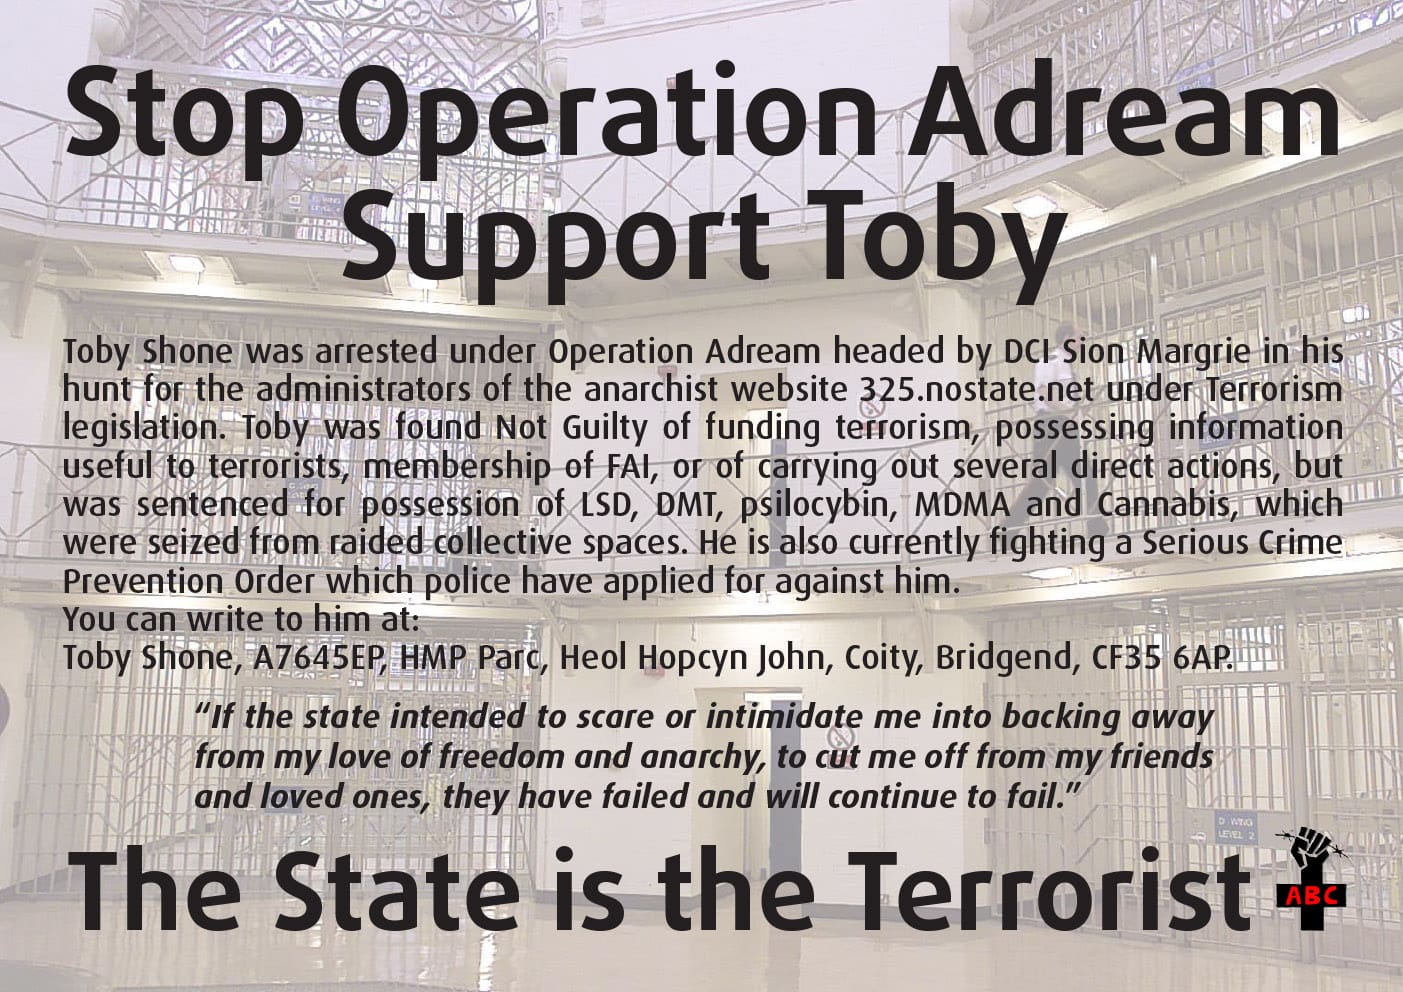 Support Toby poster - https://www.brightonabc.org.uk/images/toby_may_6_demo.pdf